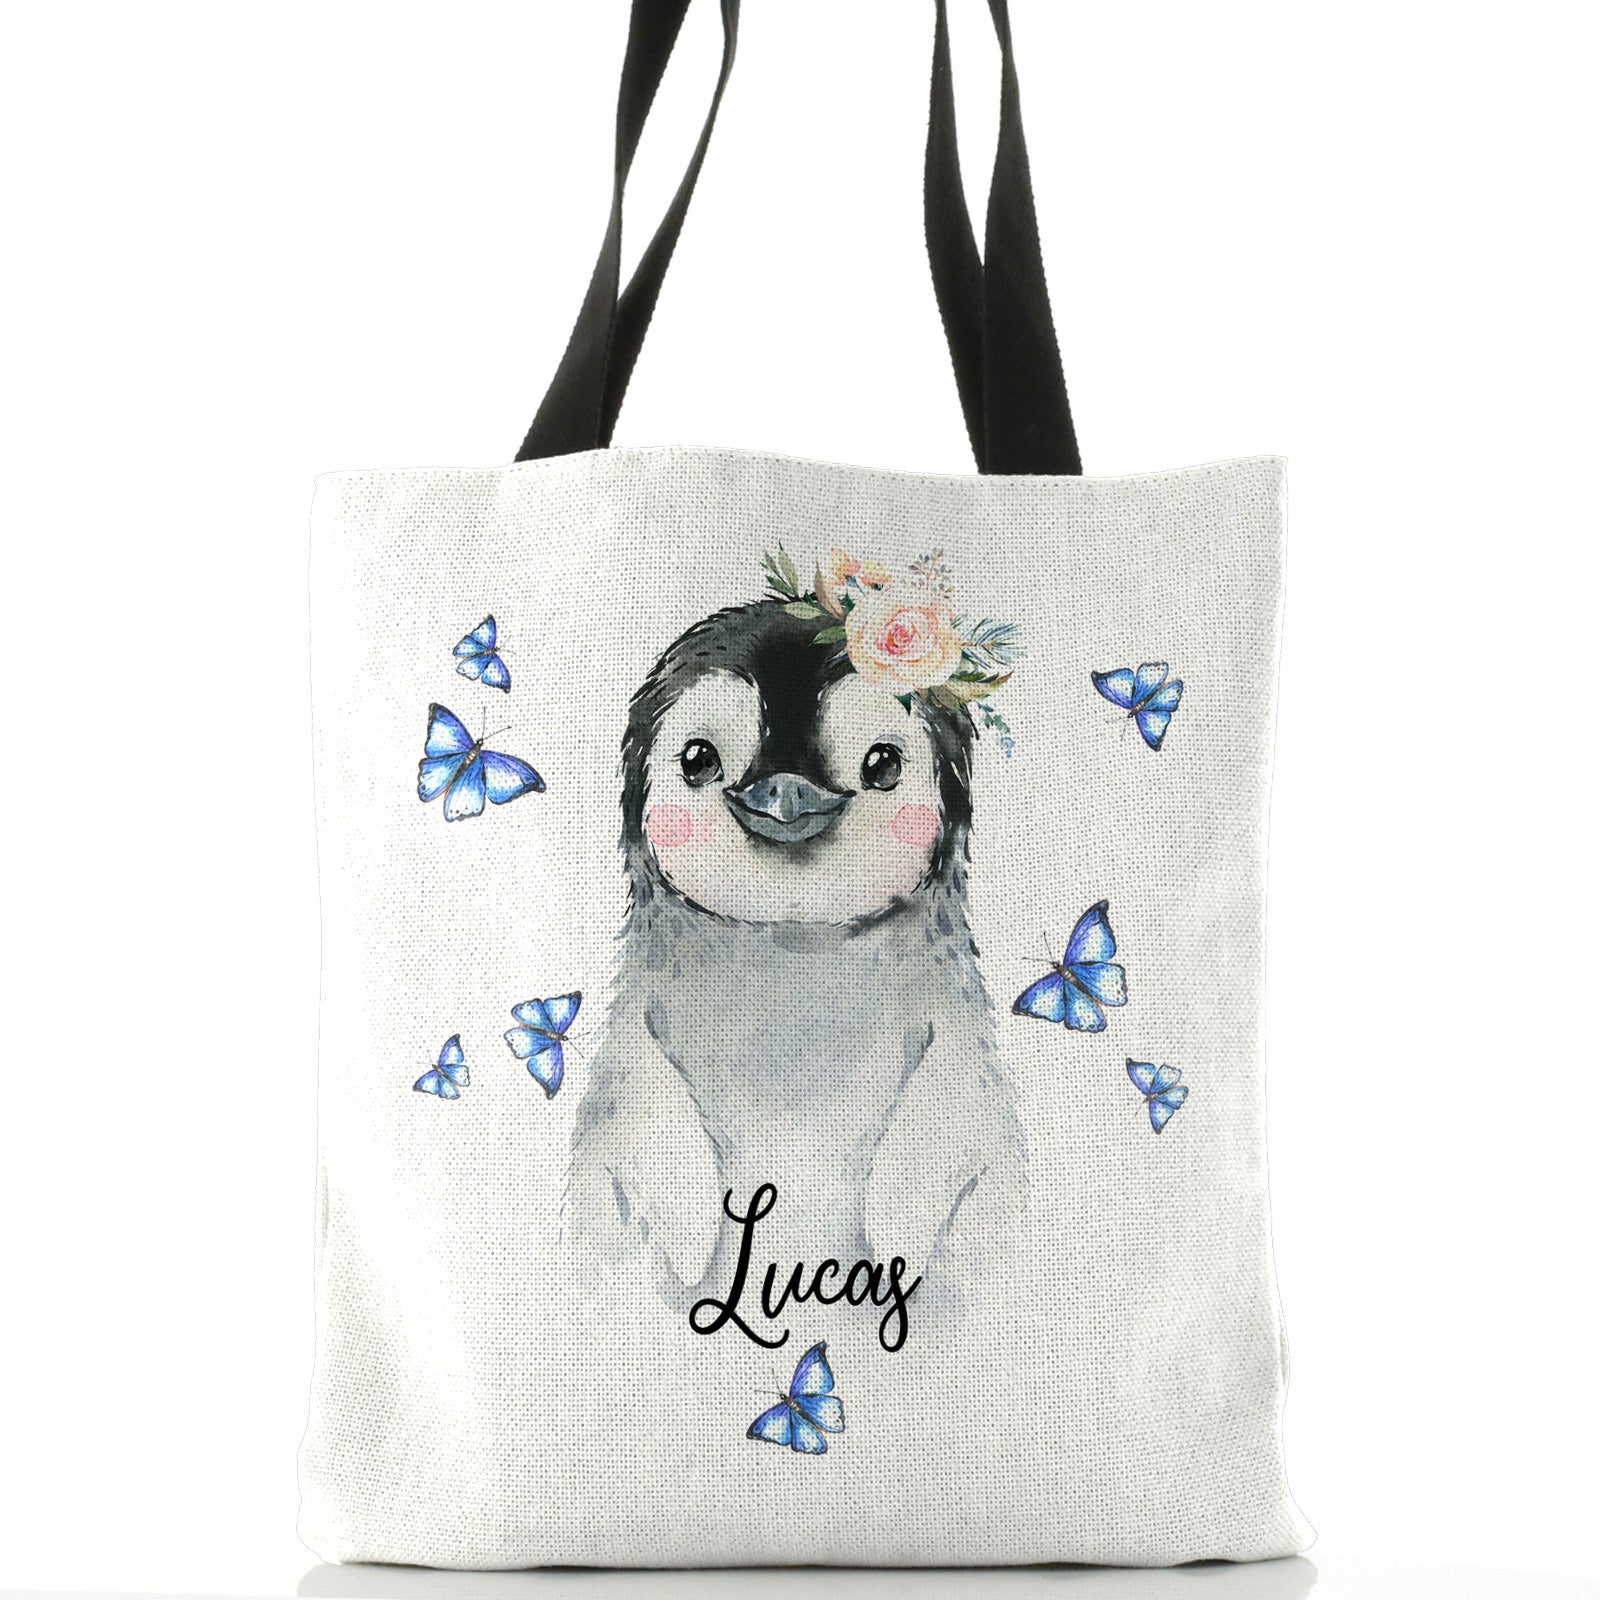 Personalised White Tote Bag with Grey Penguin Blue Butterflies and Cute Text